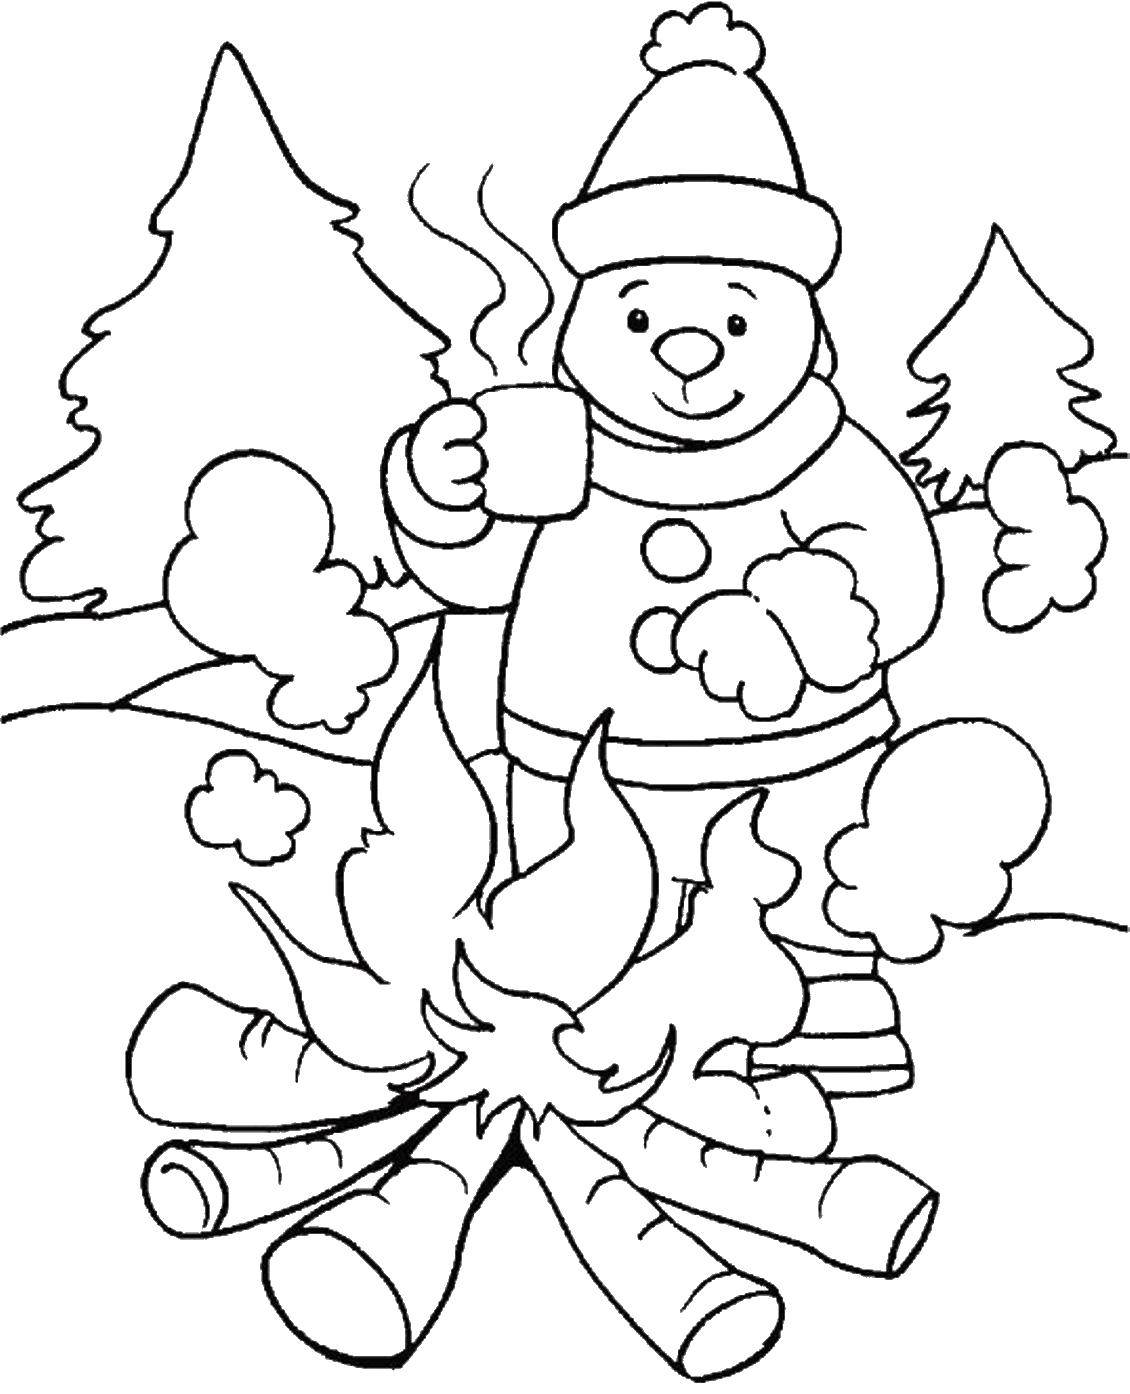 Coloring The hare in front of a fire. Category coloring winter. Tags:  hare, fire.